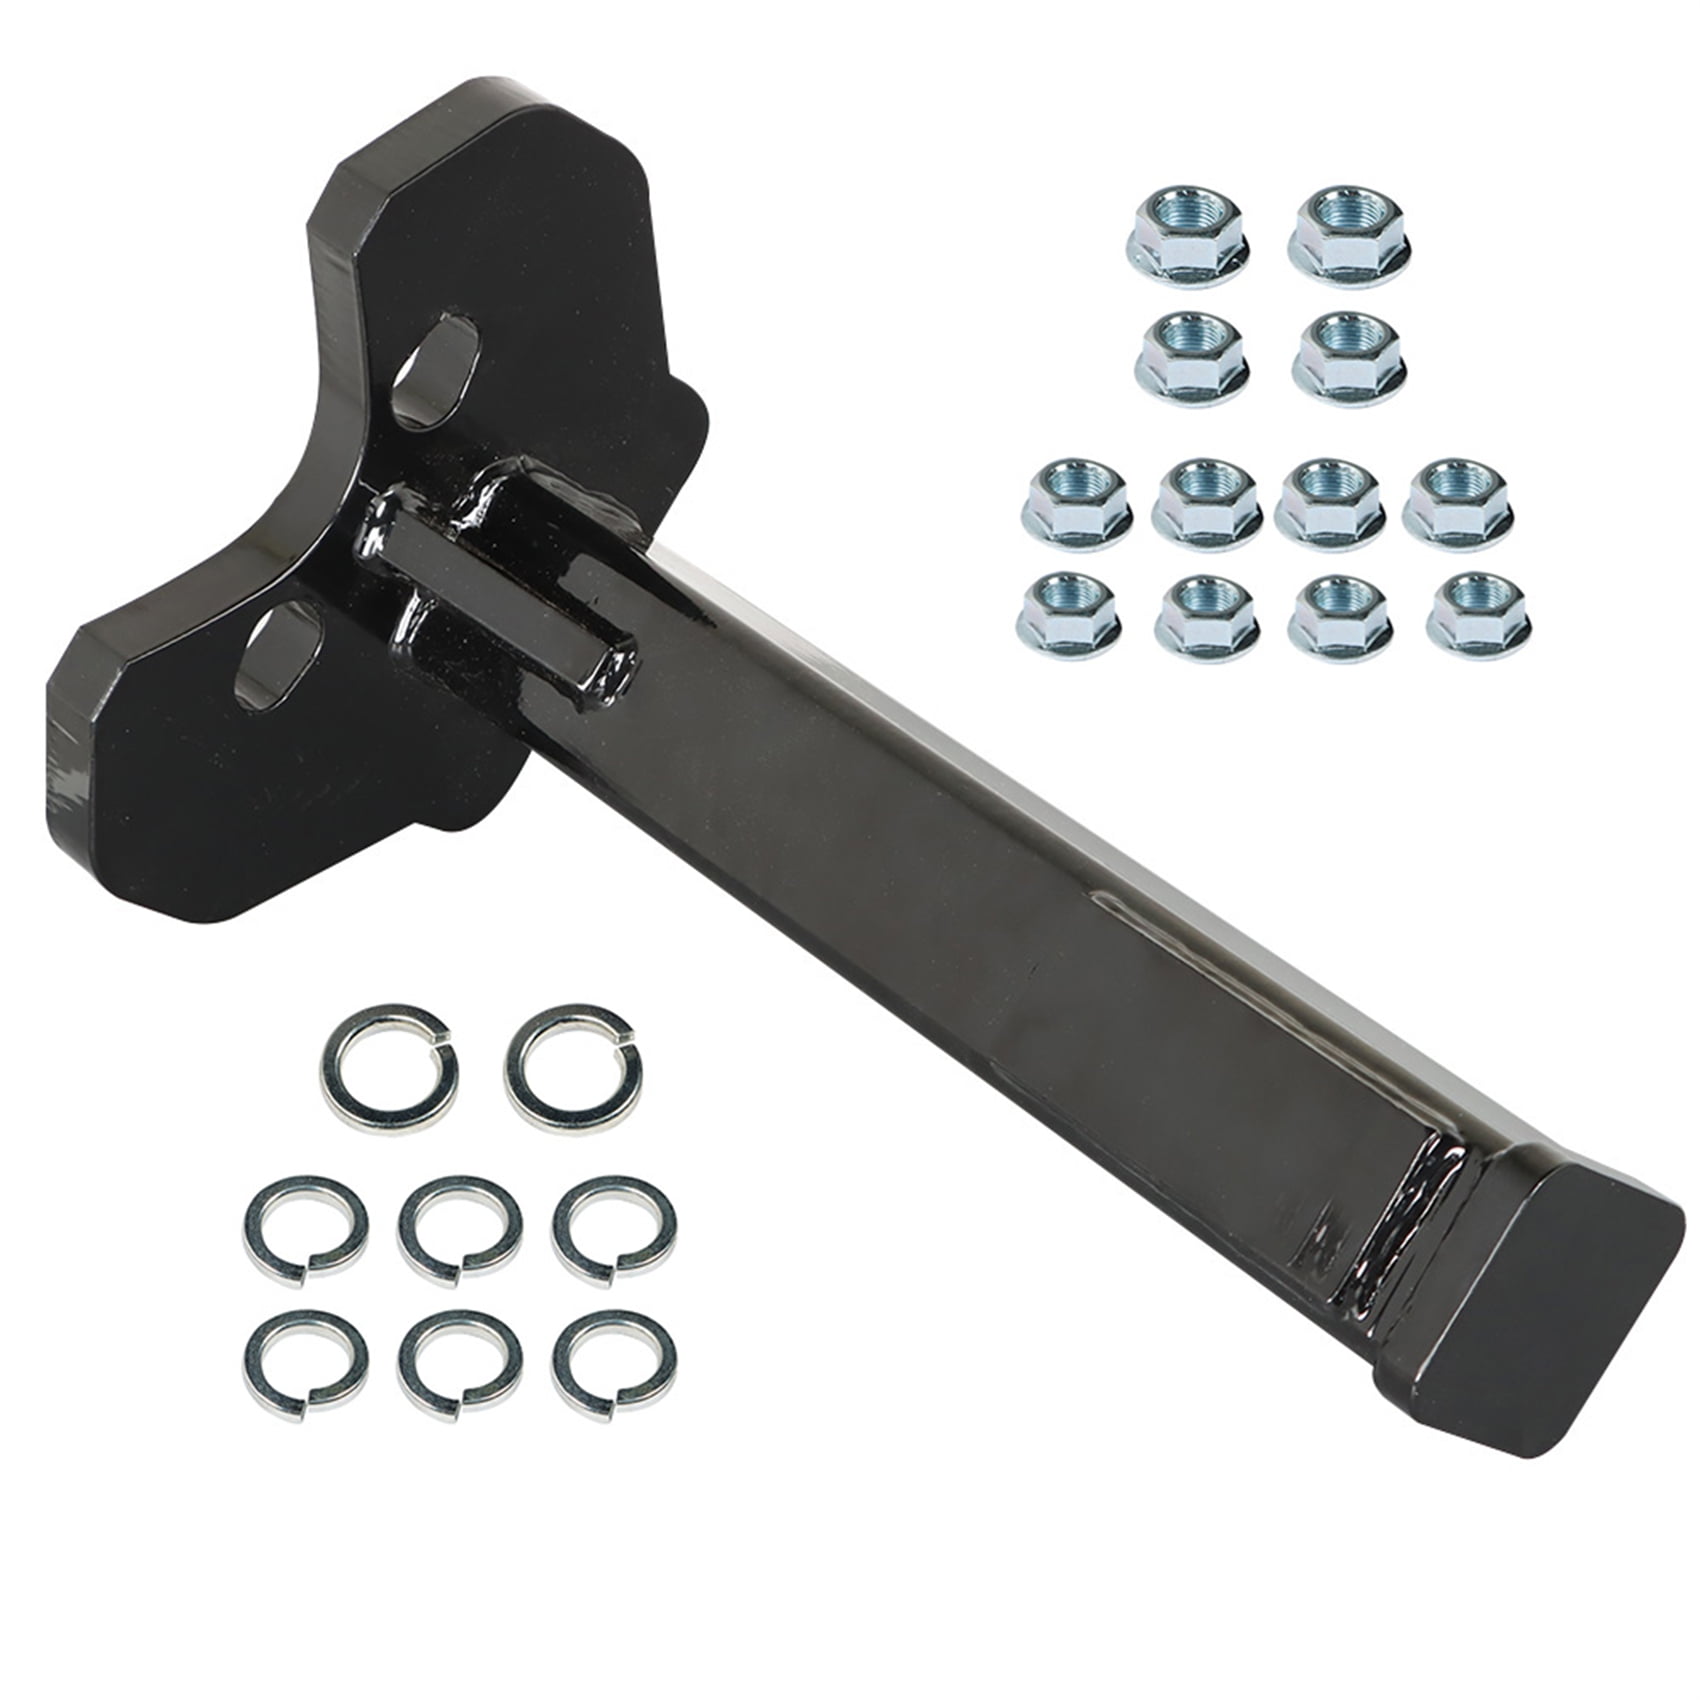 5 Wheel Hub Removal Tool 8629 Compatible with All Axle Bolt Hubs 6 and 8 Lug Hubs Universal Wheel Bearing Removal Tool with Nuts 